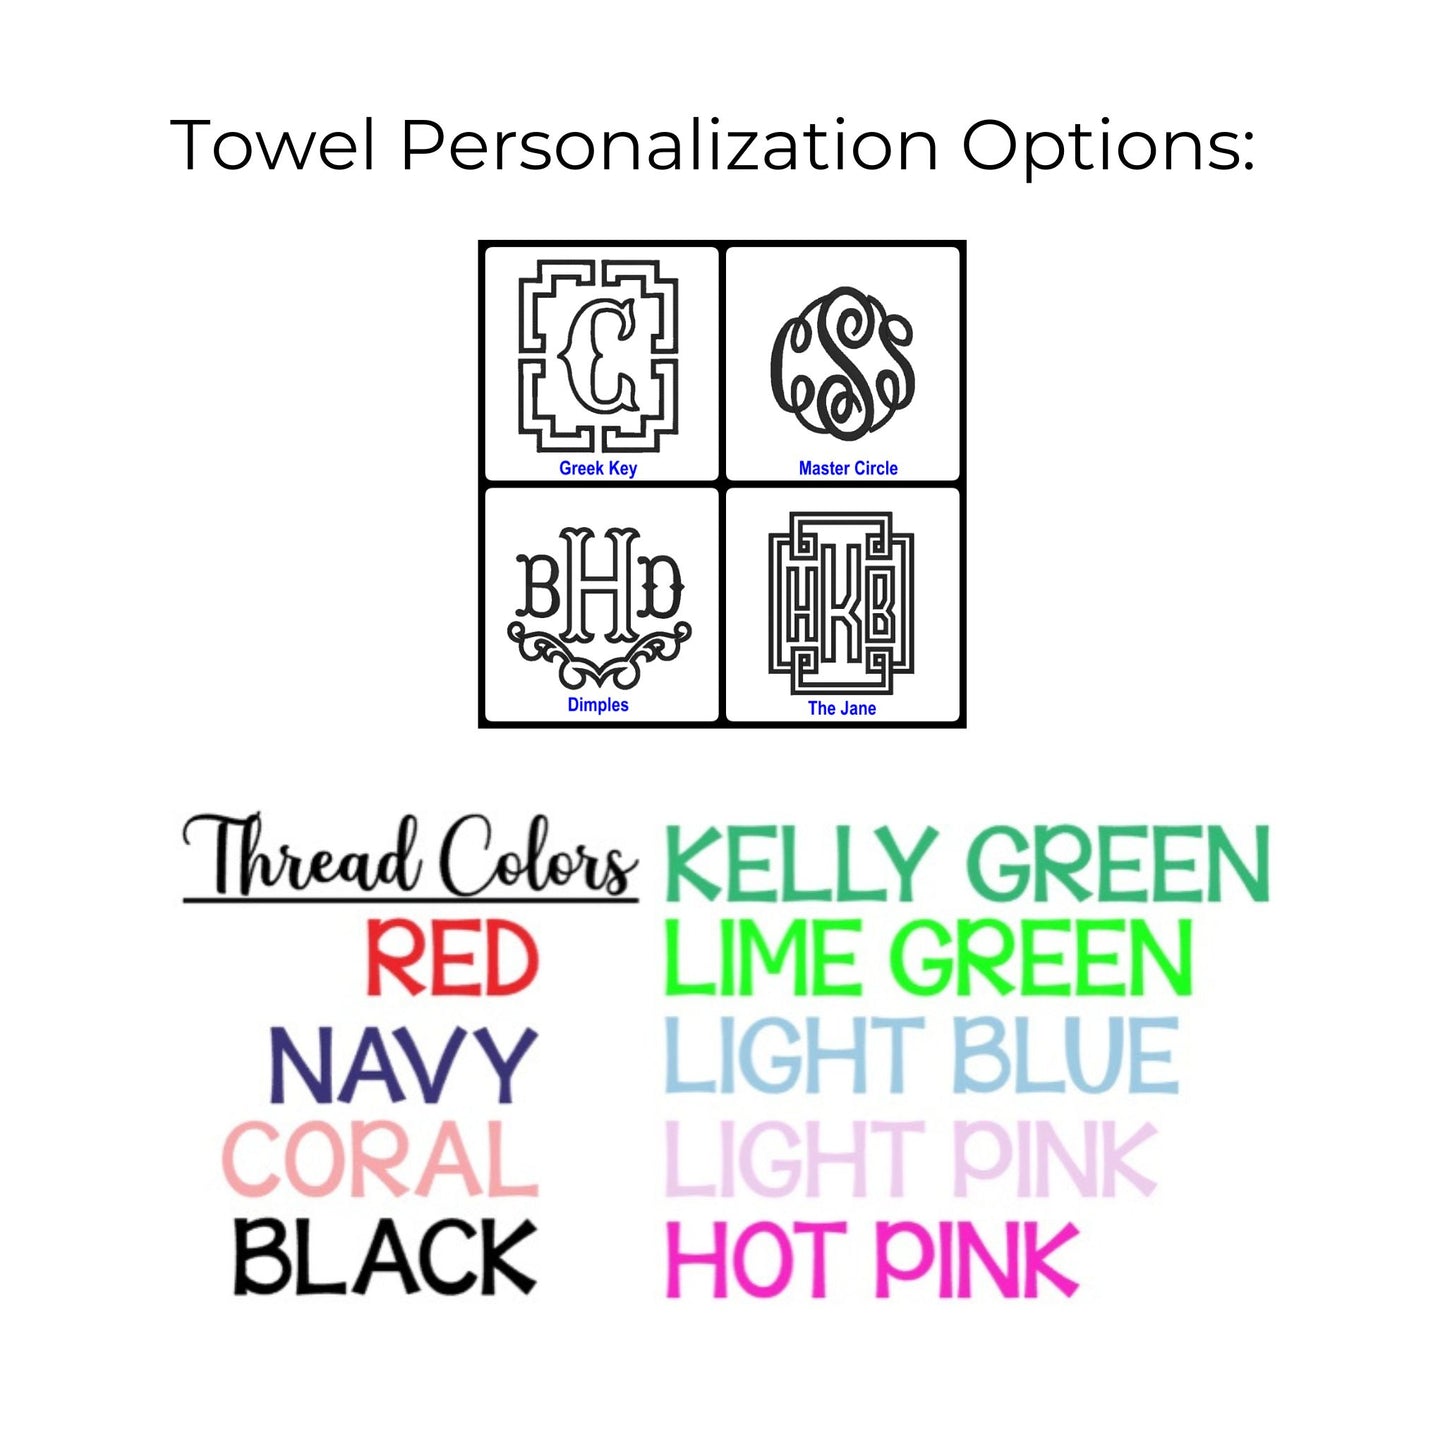 Personalization layout and thread colors by Winston's Collection